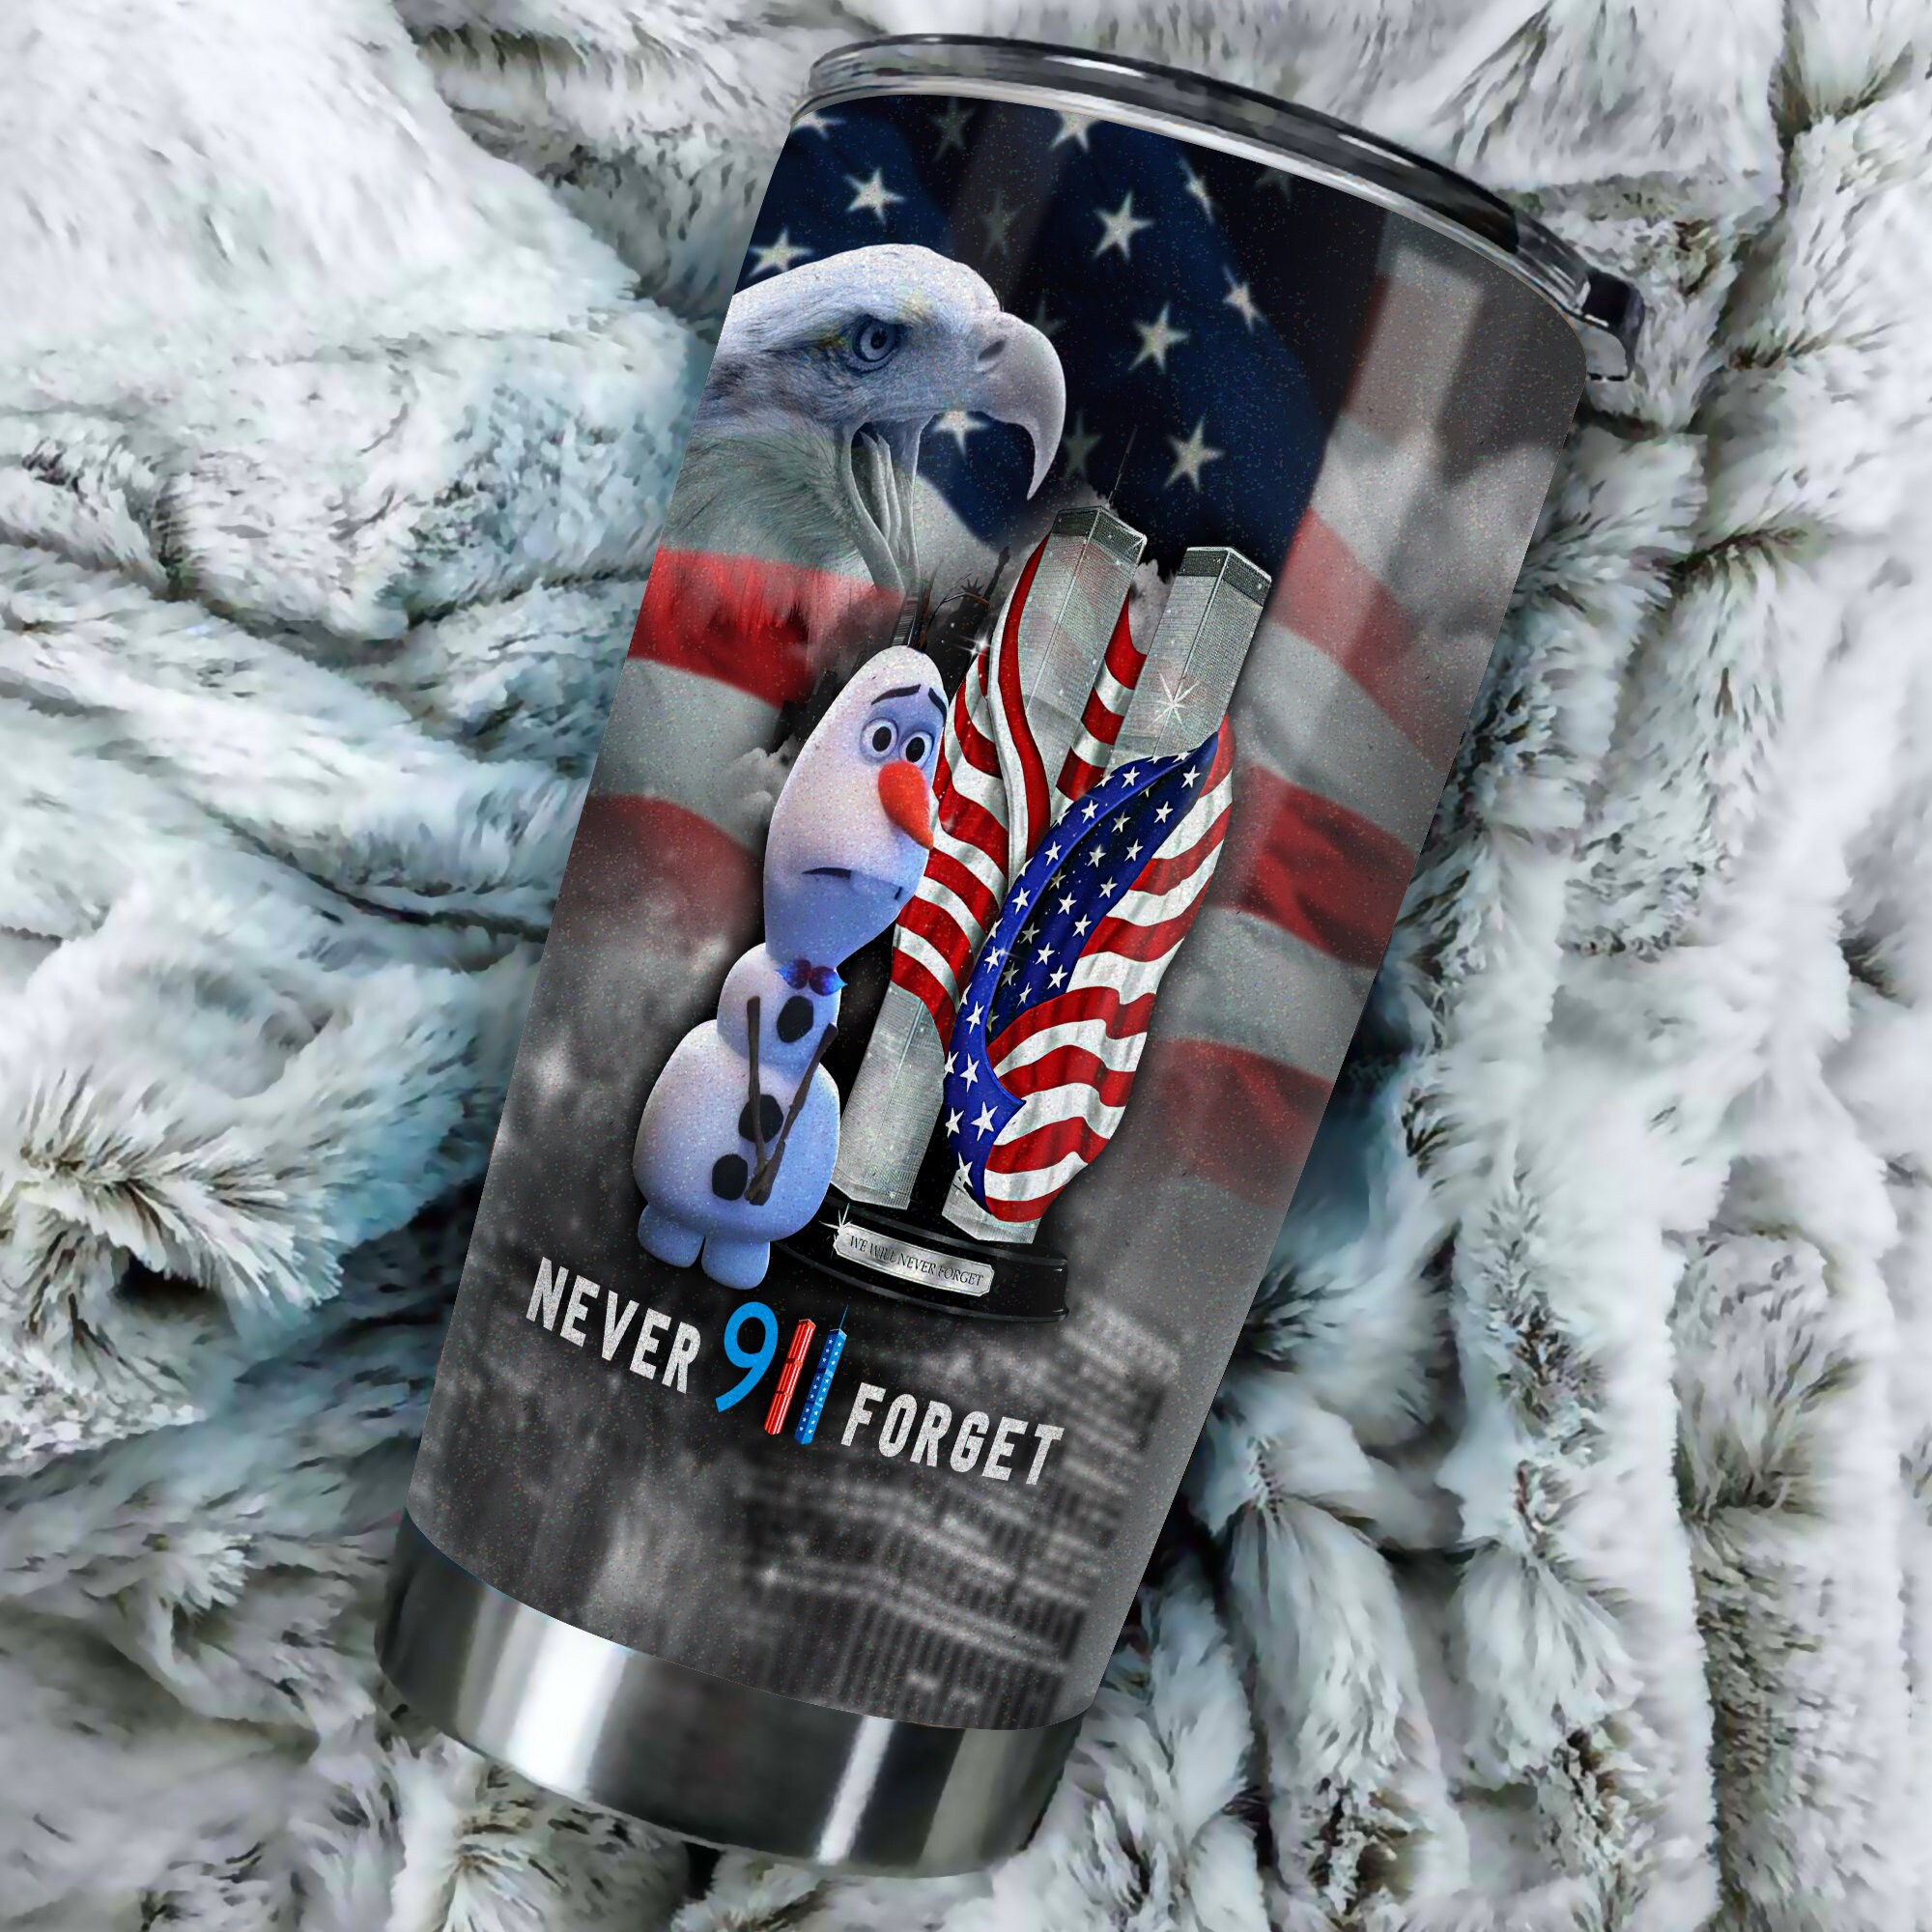 Olaf Frozen US Flag Never Forget 911 Disney Graphic Cartoon Stainless Steel Tumbler